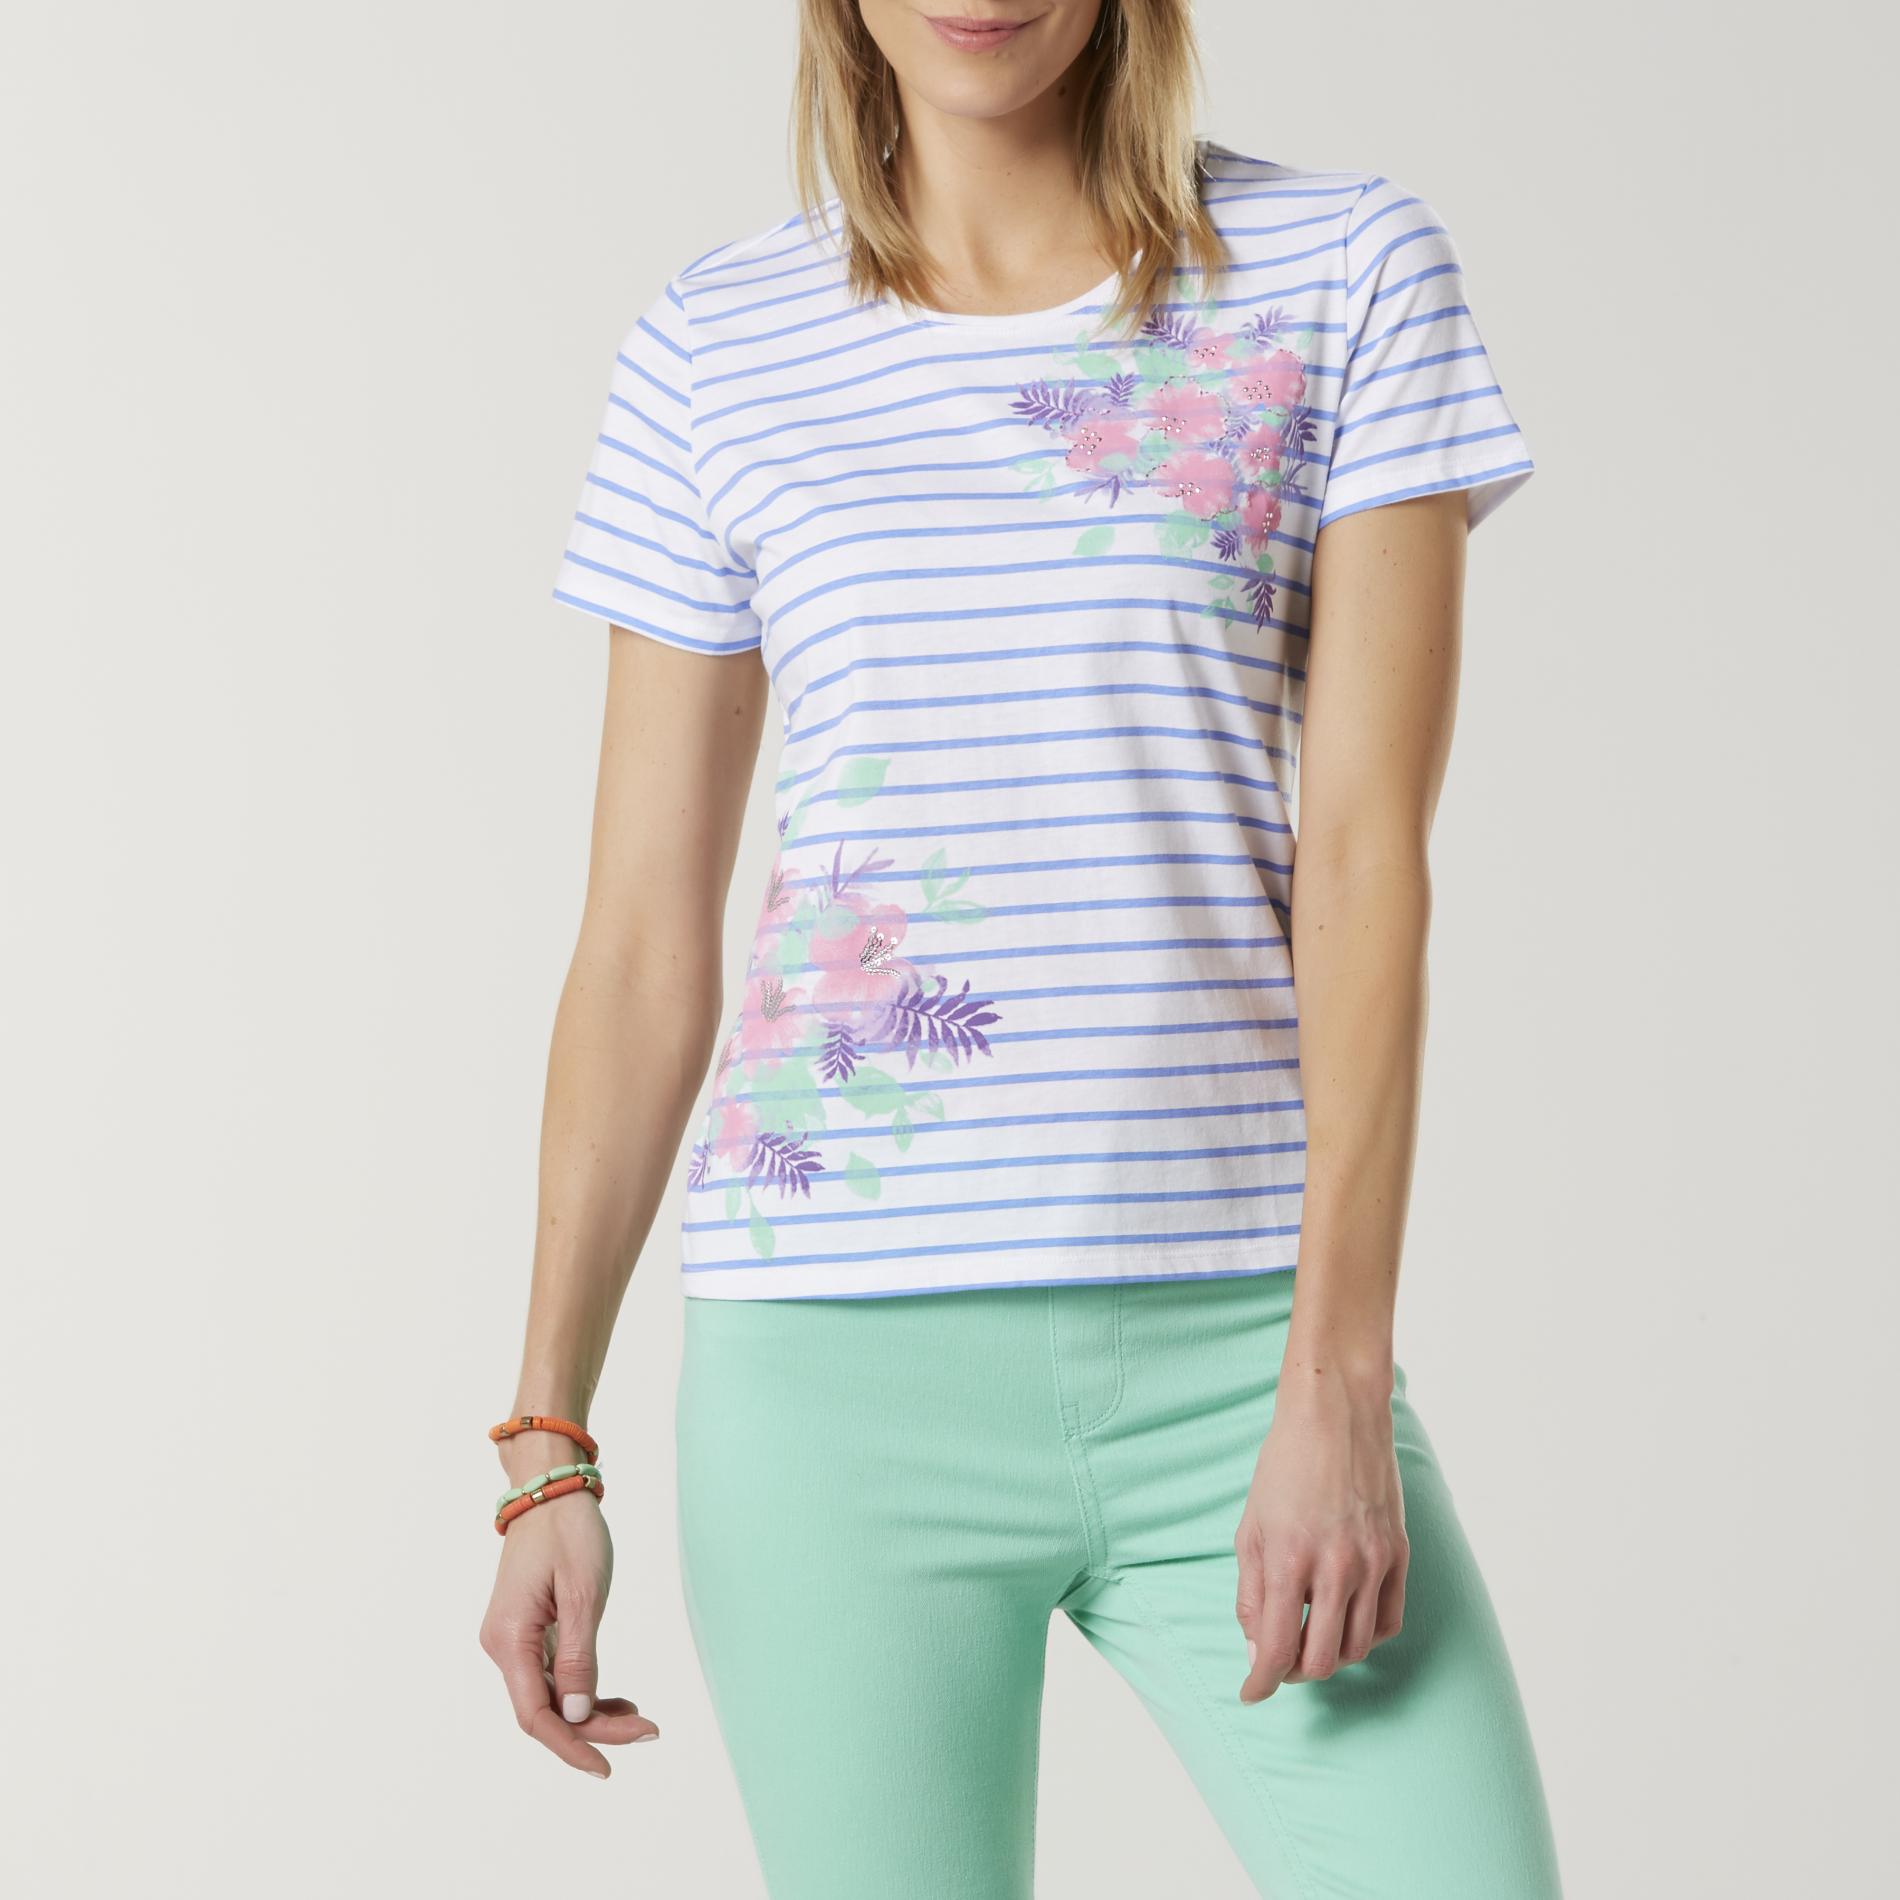 Laura Scott Women's Embellished Graphic T-Shirt - Striped Floral